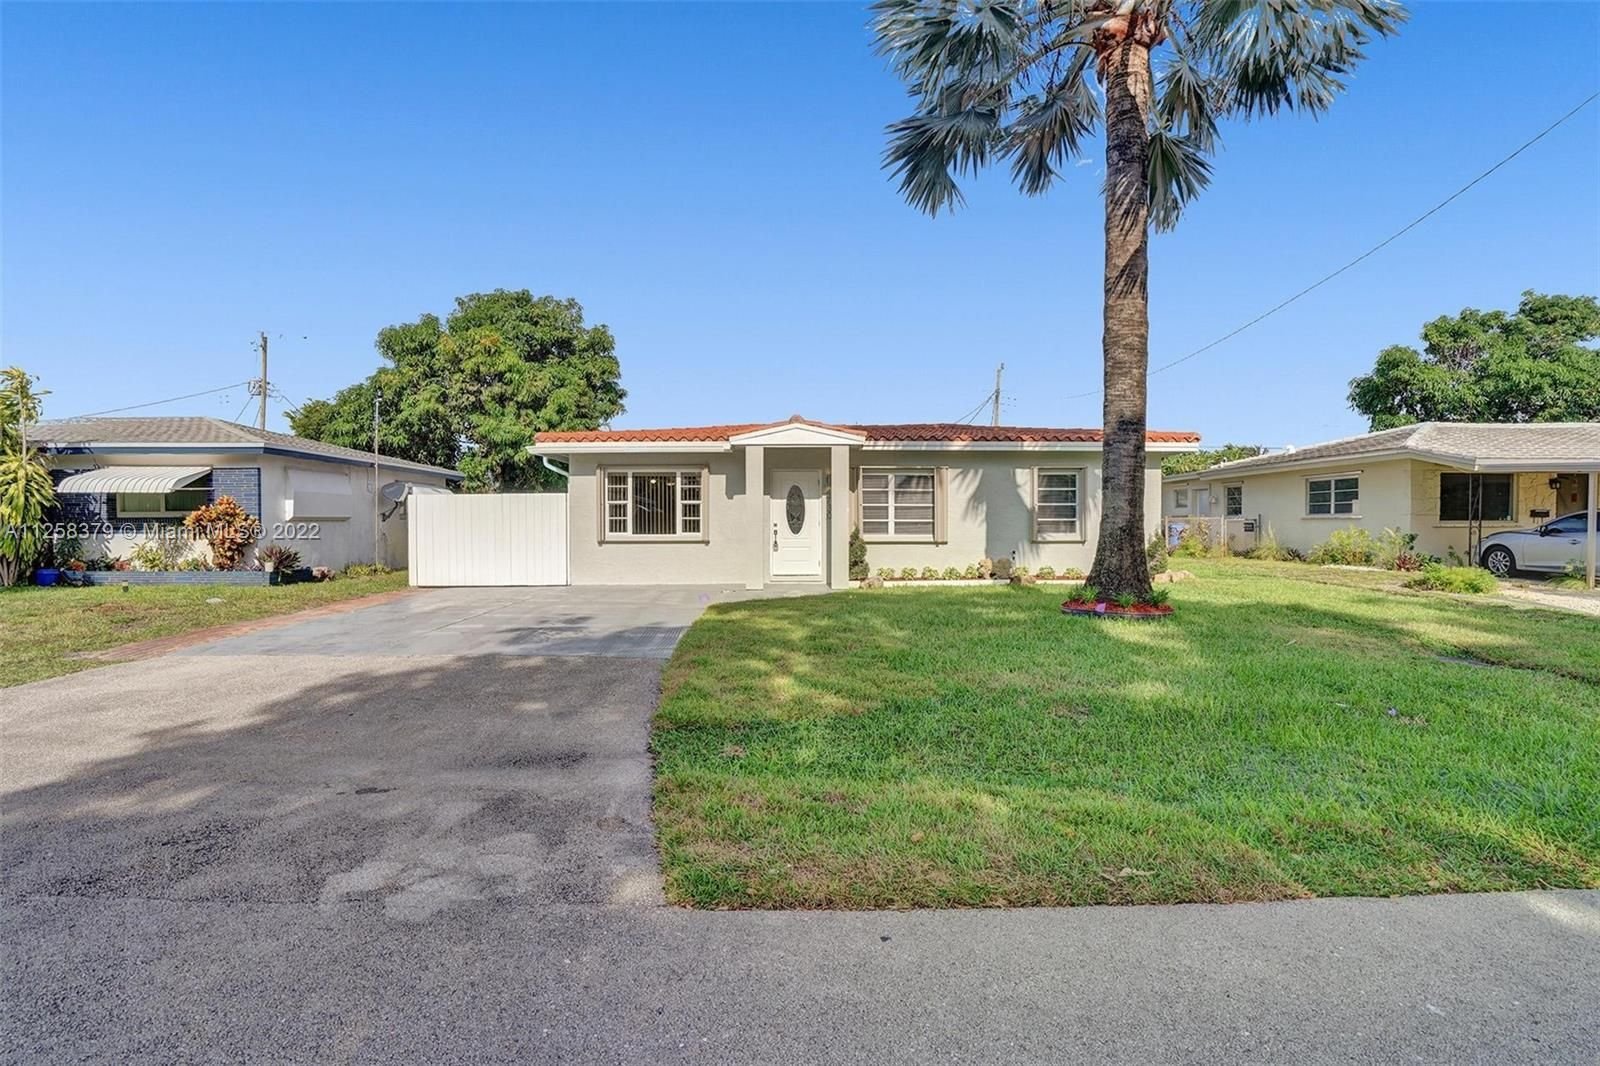 Real estate property located at 4730 3rd Ave, Broward County, Oakland Park, FL